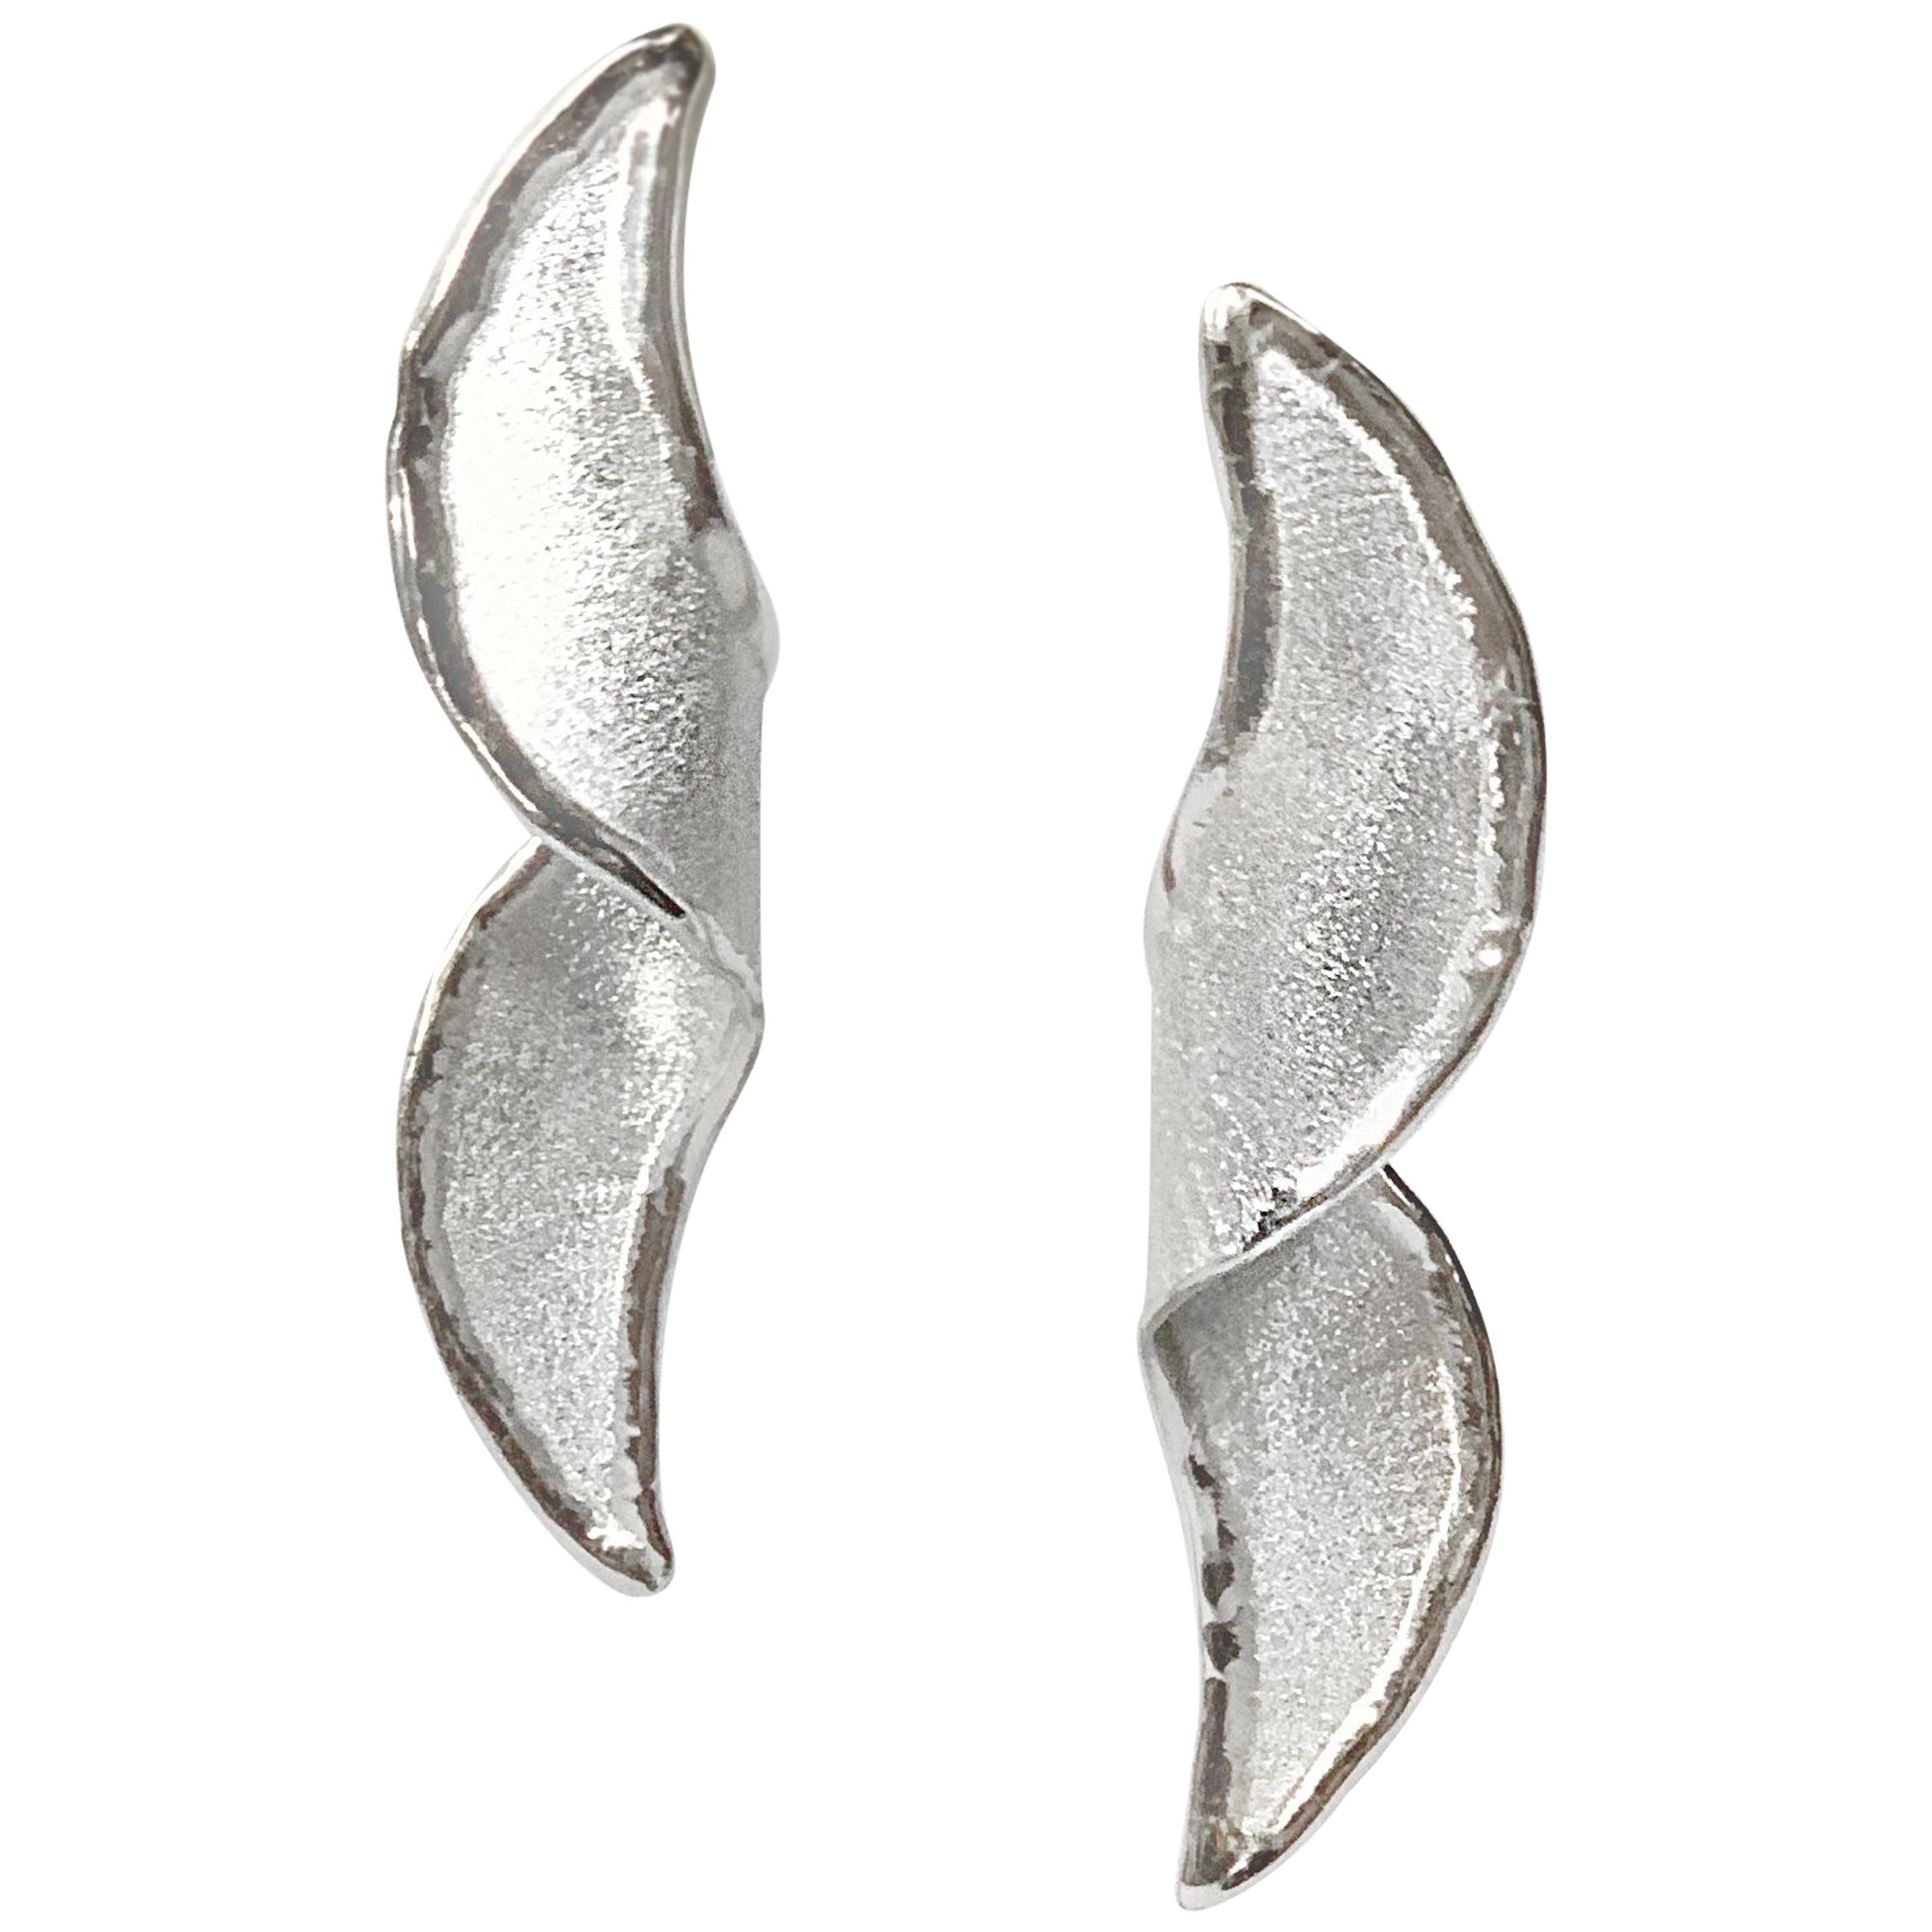 Yianni Creations Ammos Collection 100% Handmade Artisan Earrings from Fine Silver. These eye-catching earrings present unique techniques of craftsmanship - brushed texture and nature-inspired liquid edges together with an unusual shape. The core of